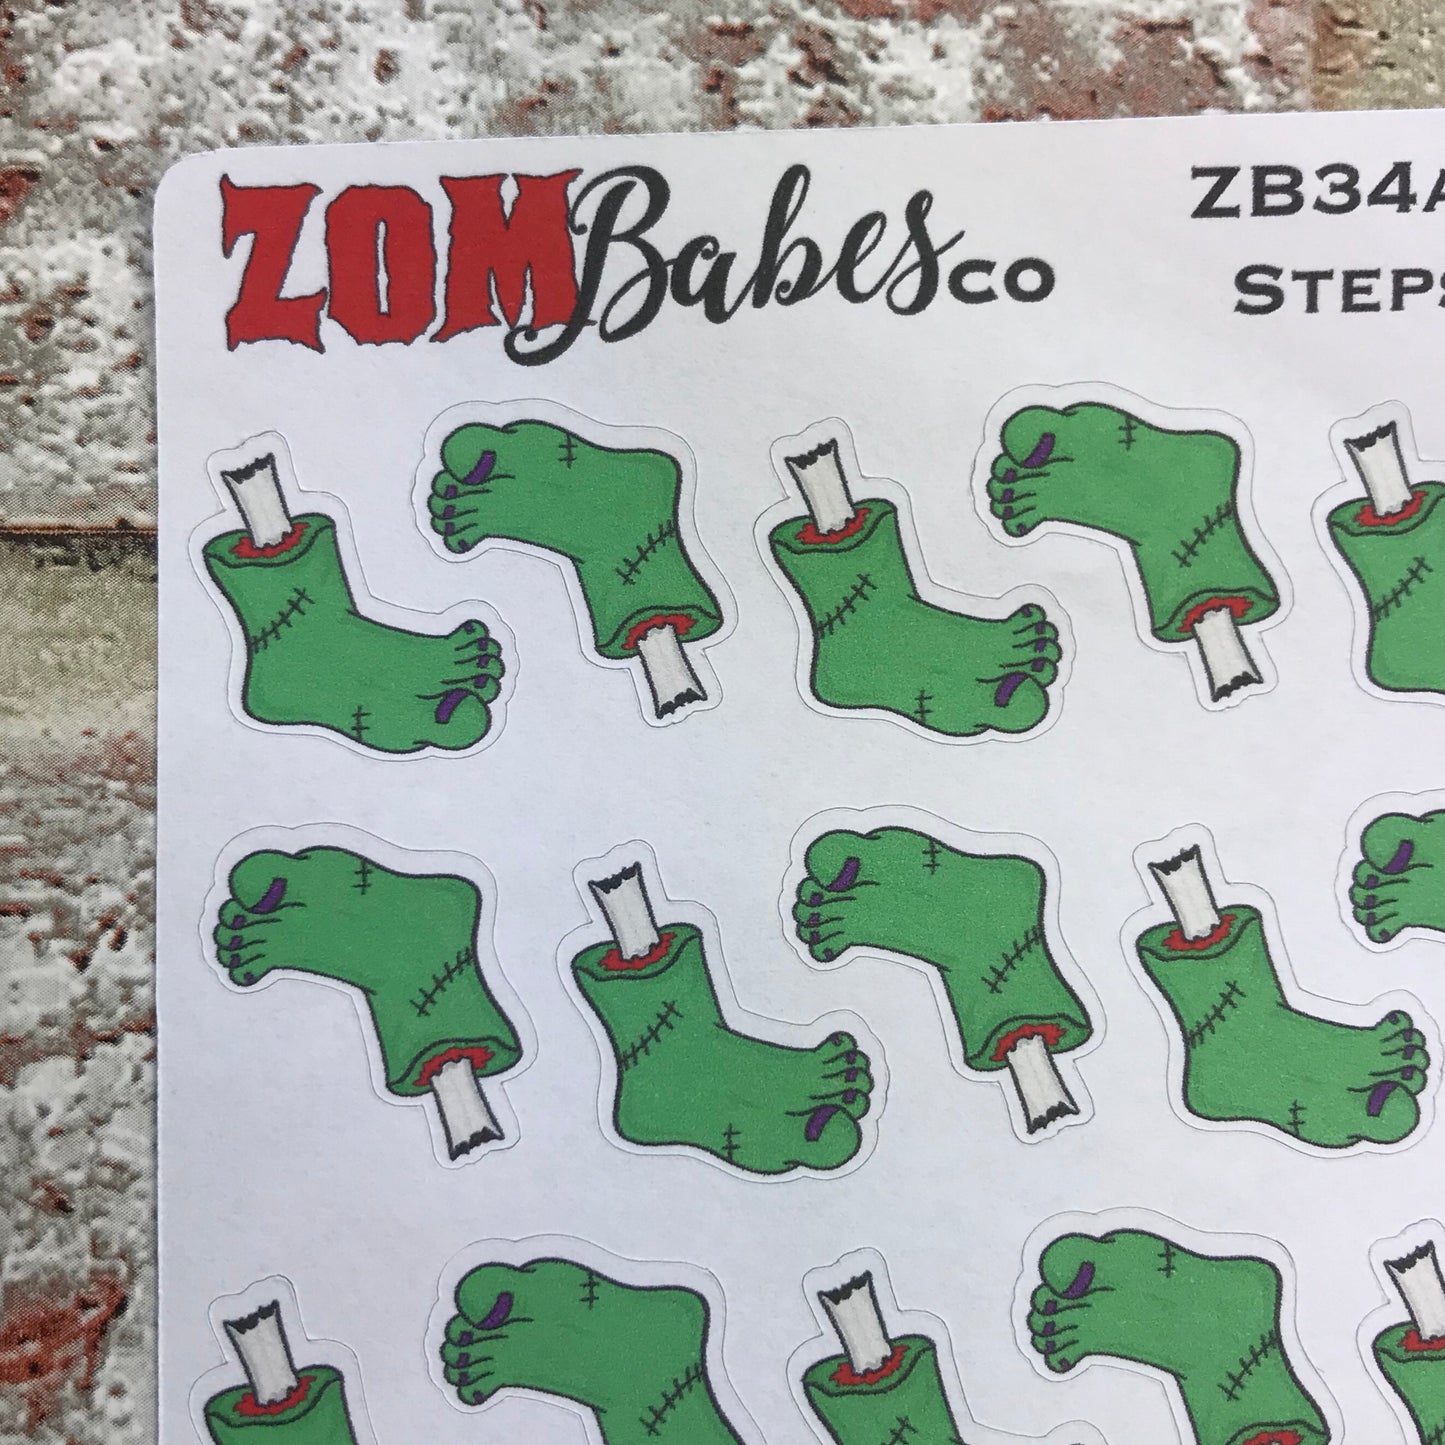 Step tracking / 5k / 10k / 20k Run Zombabe character sticker for planners (ZB34abcd)